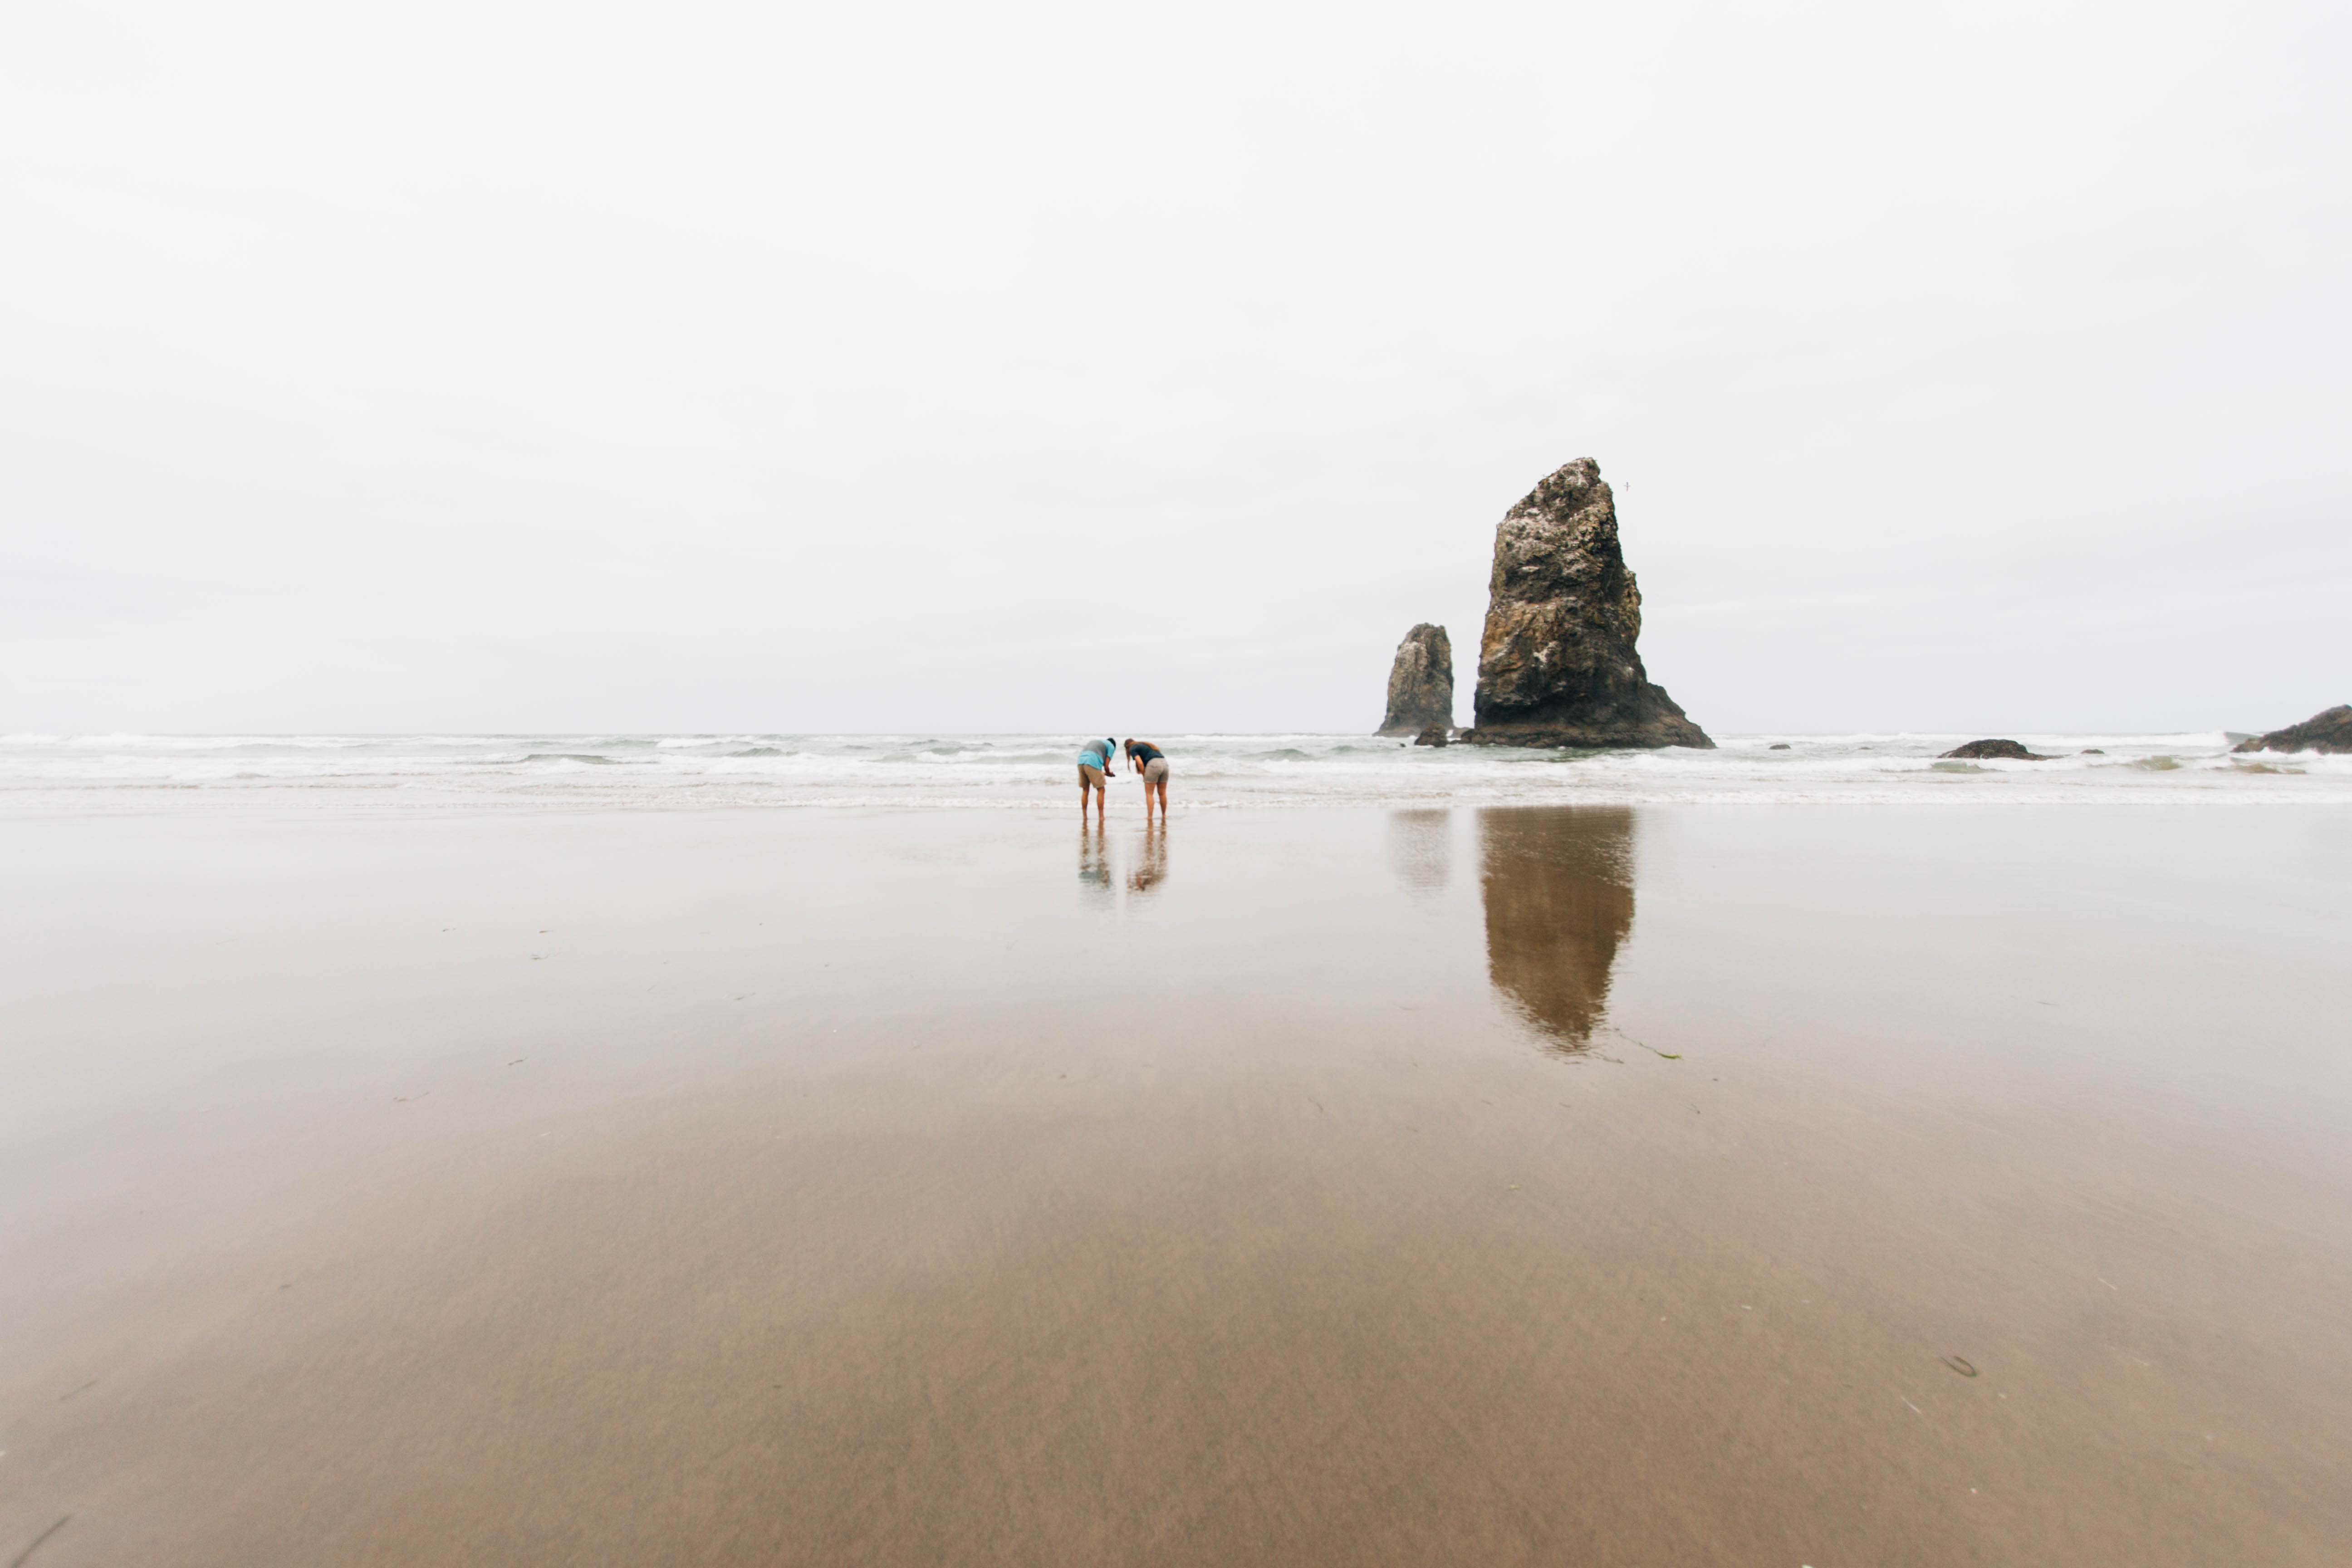 two person on seashore near brown rock formation under white sky during daytime